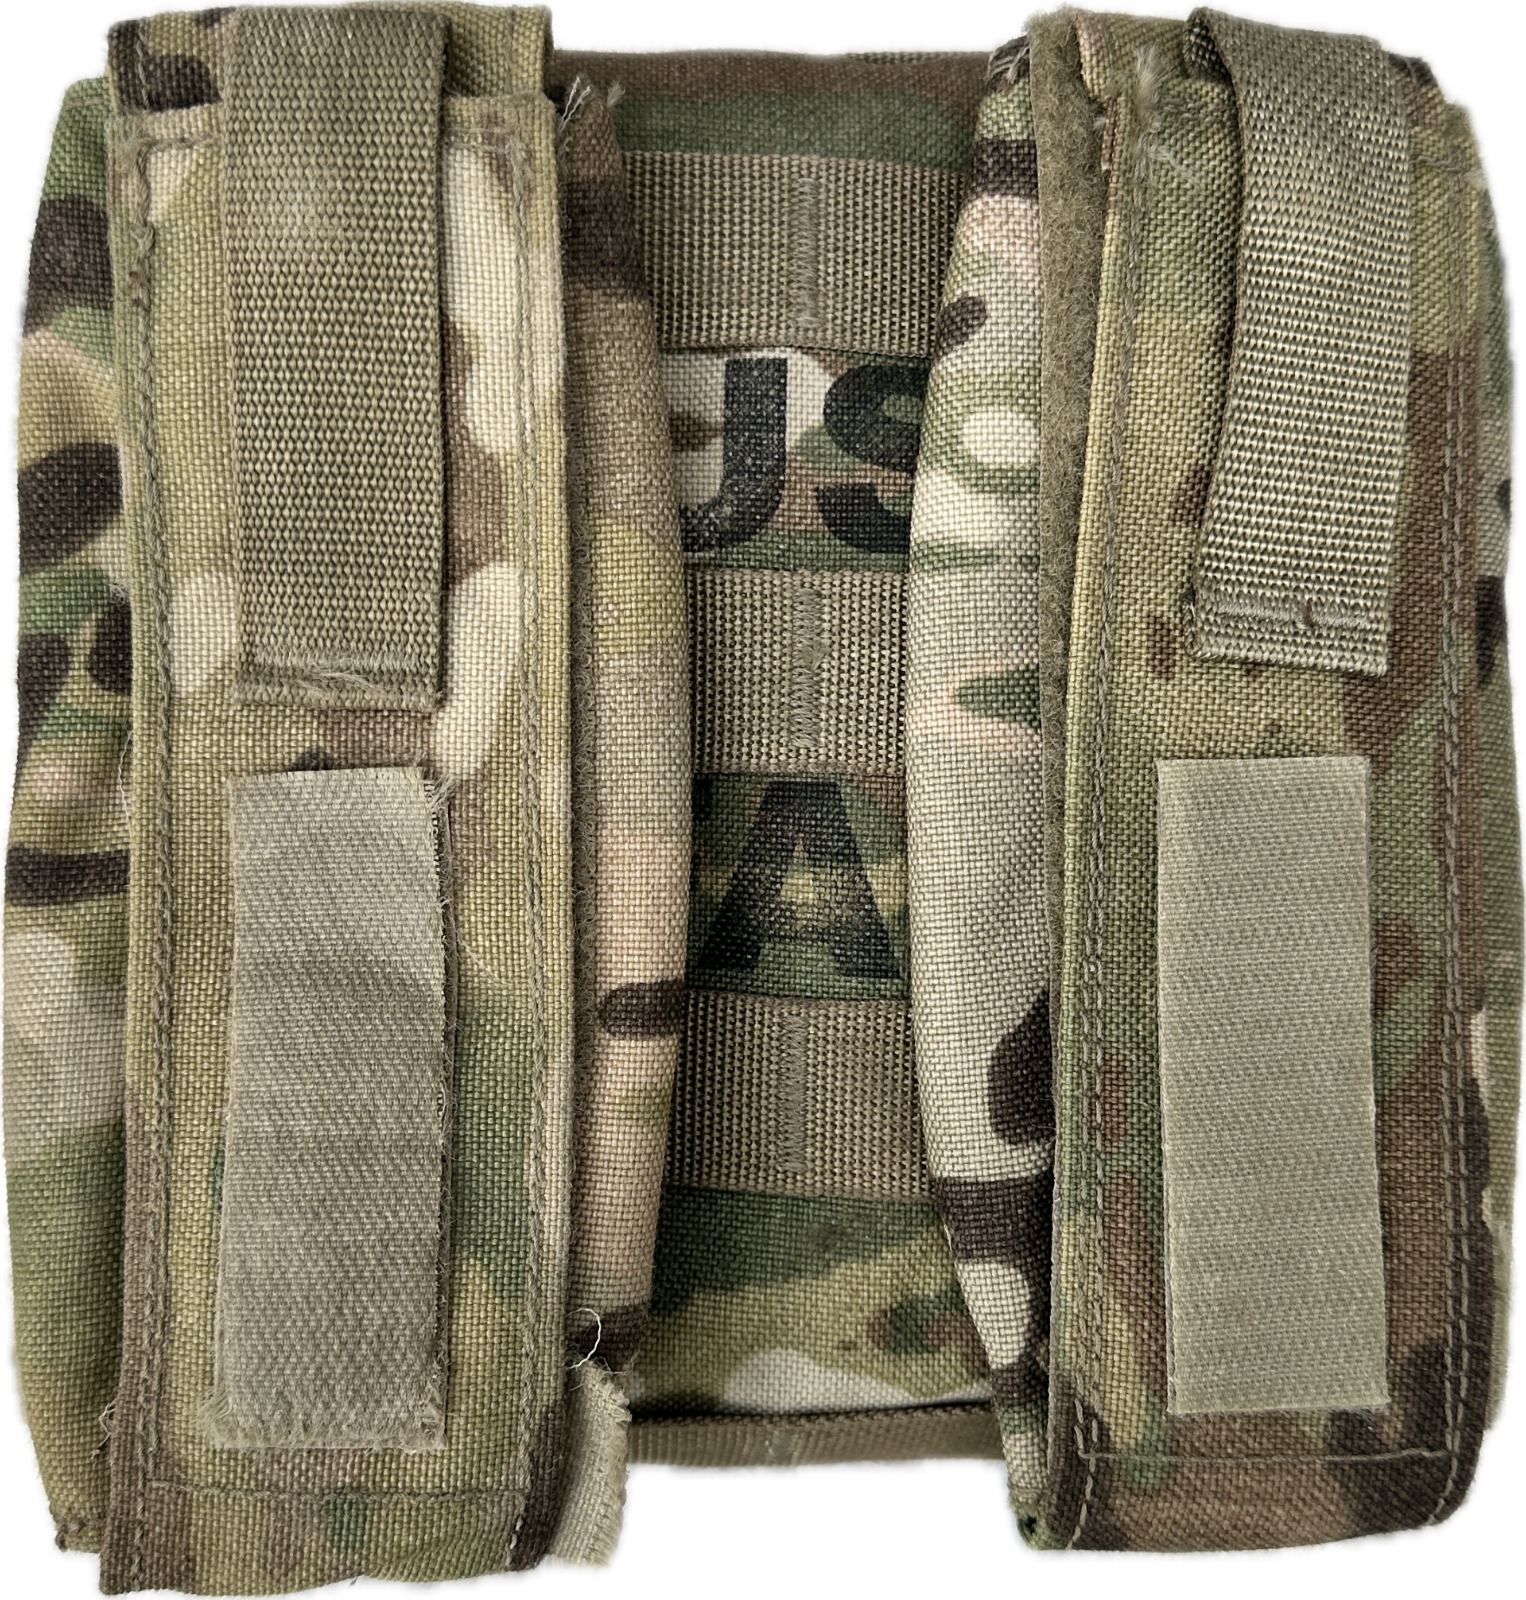 US Army Ifak II First Aid Kit Medic Pouch With 2 Tourniquet Bag Multicam